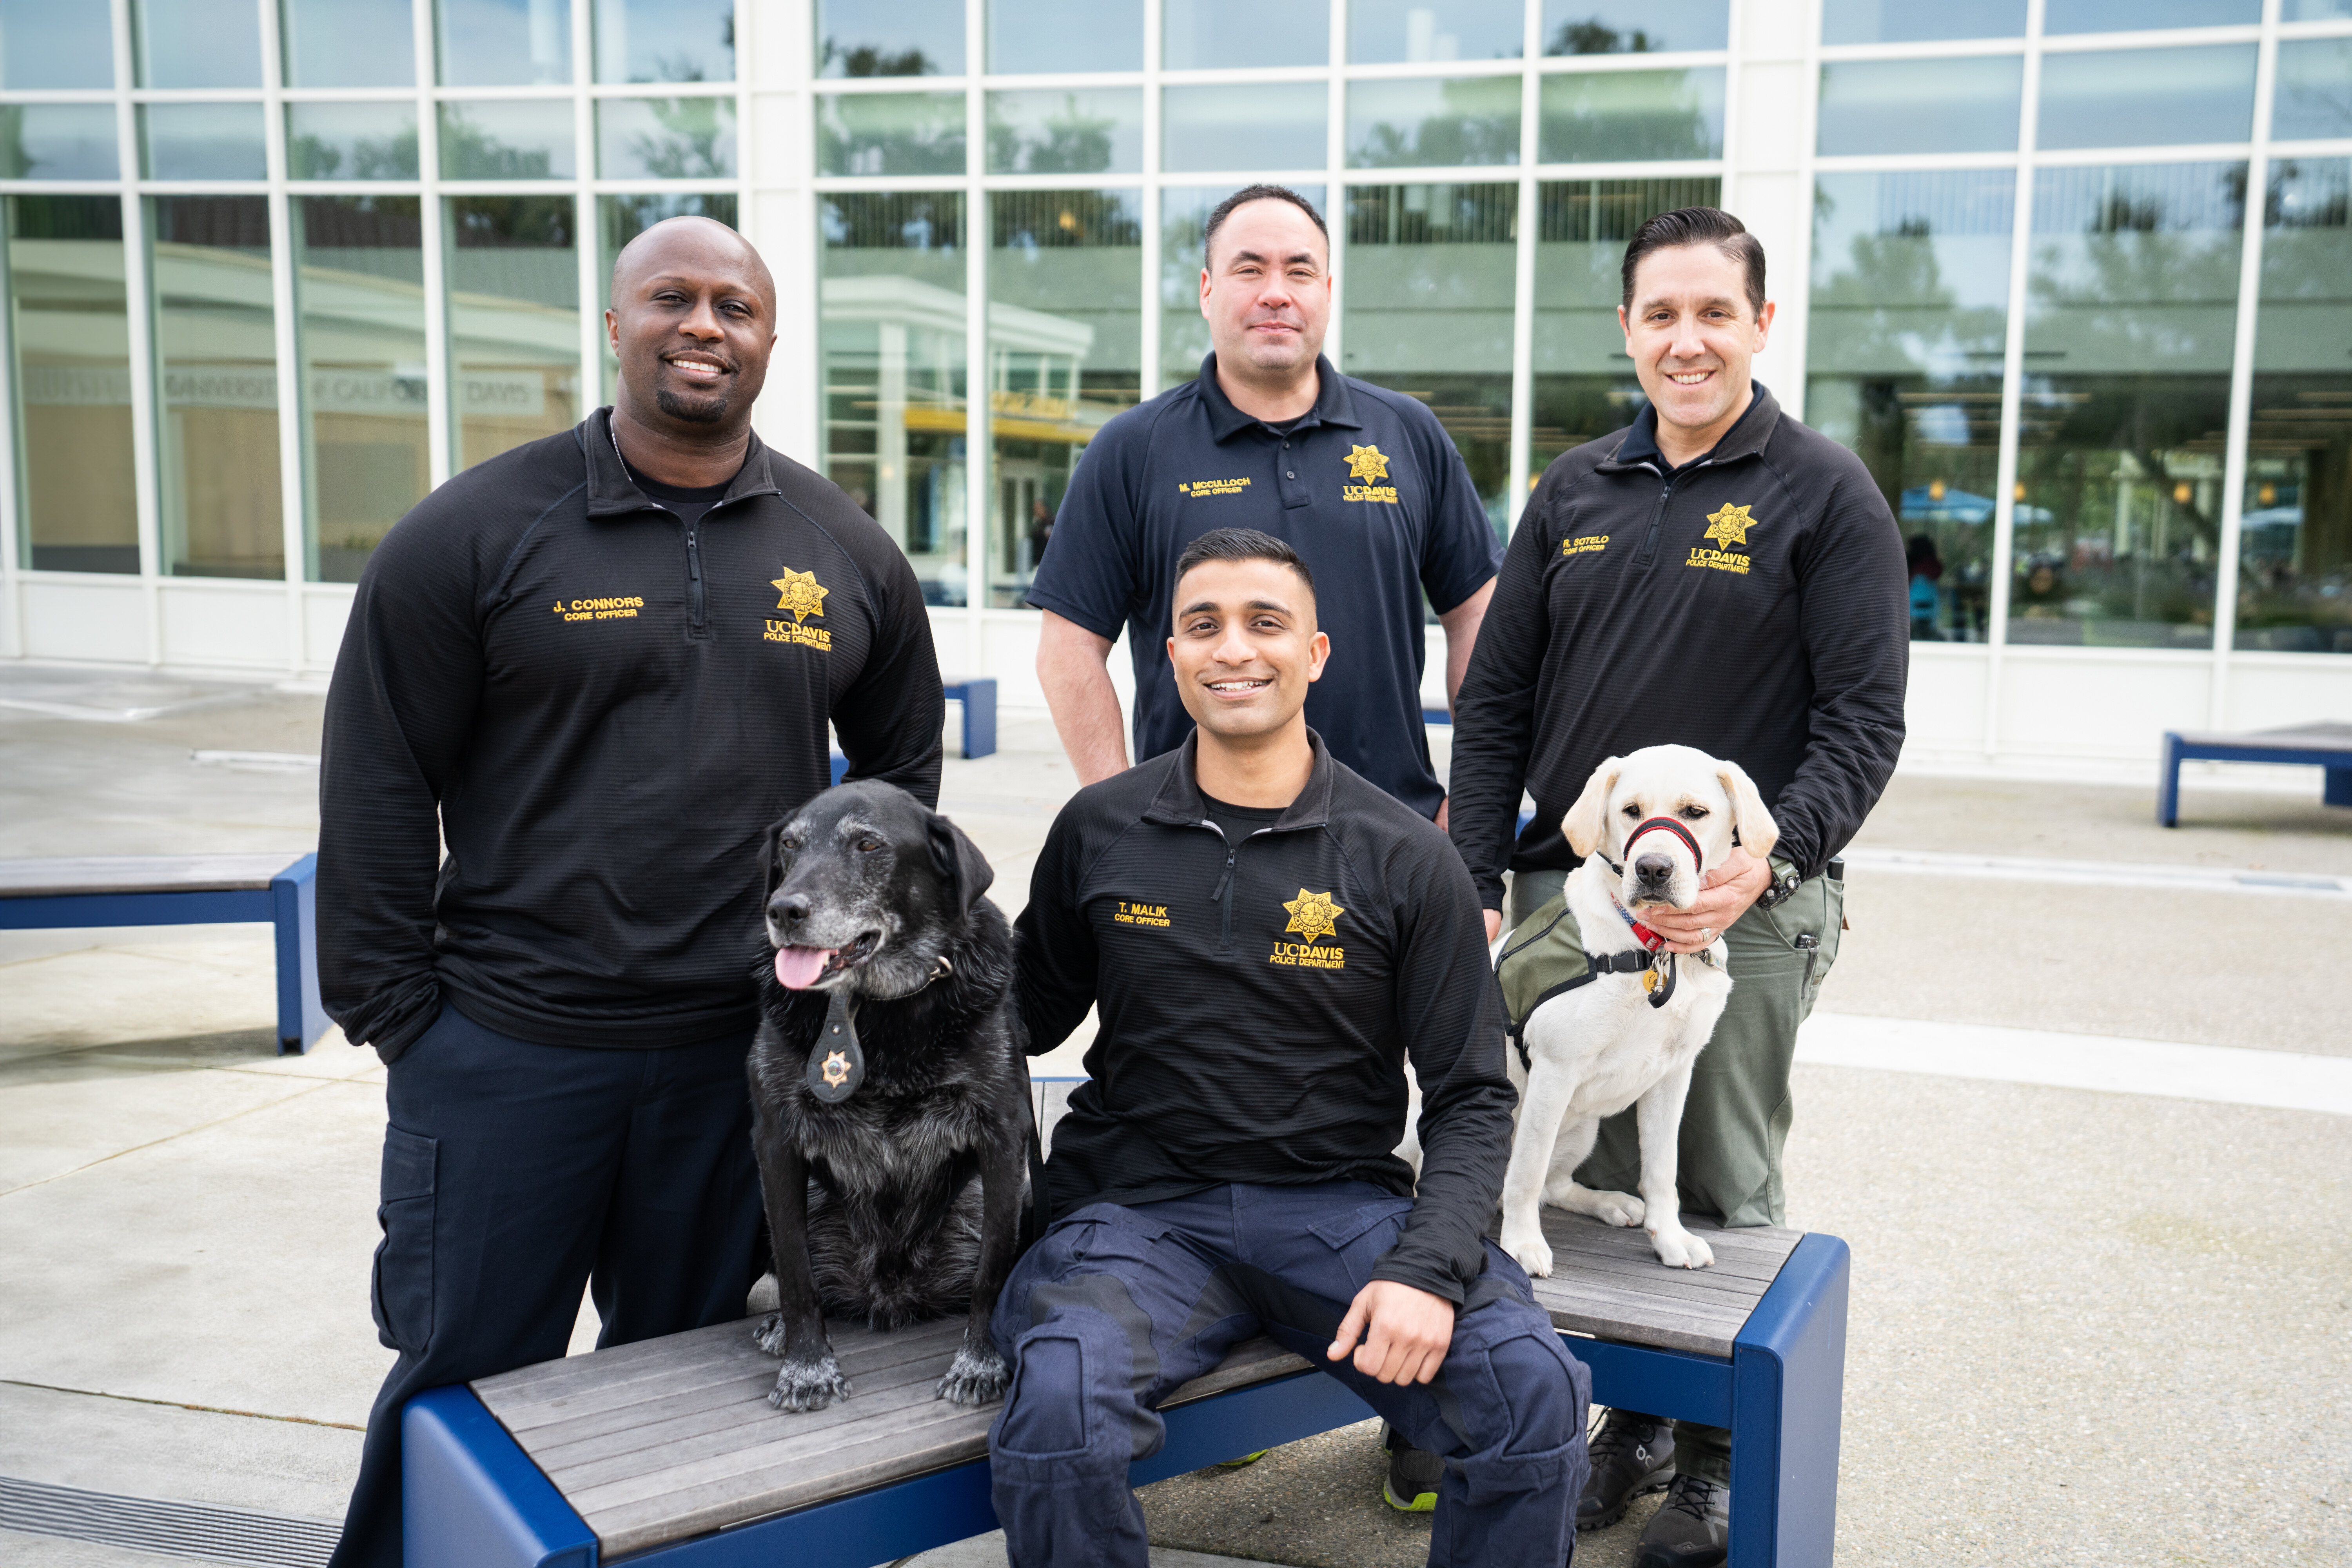 CORE Officers in uniform and their two dogs sit and smile outside the MU.